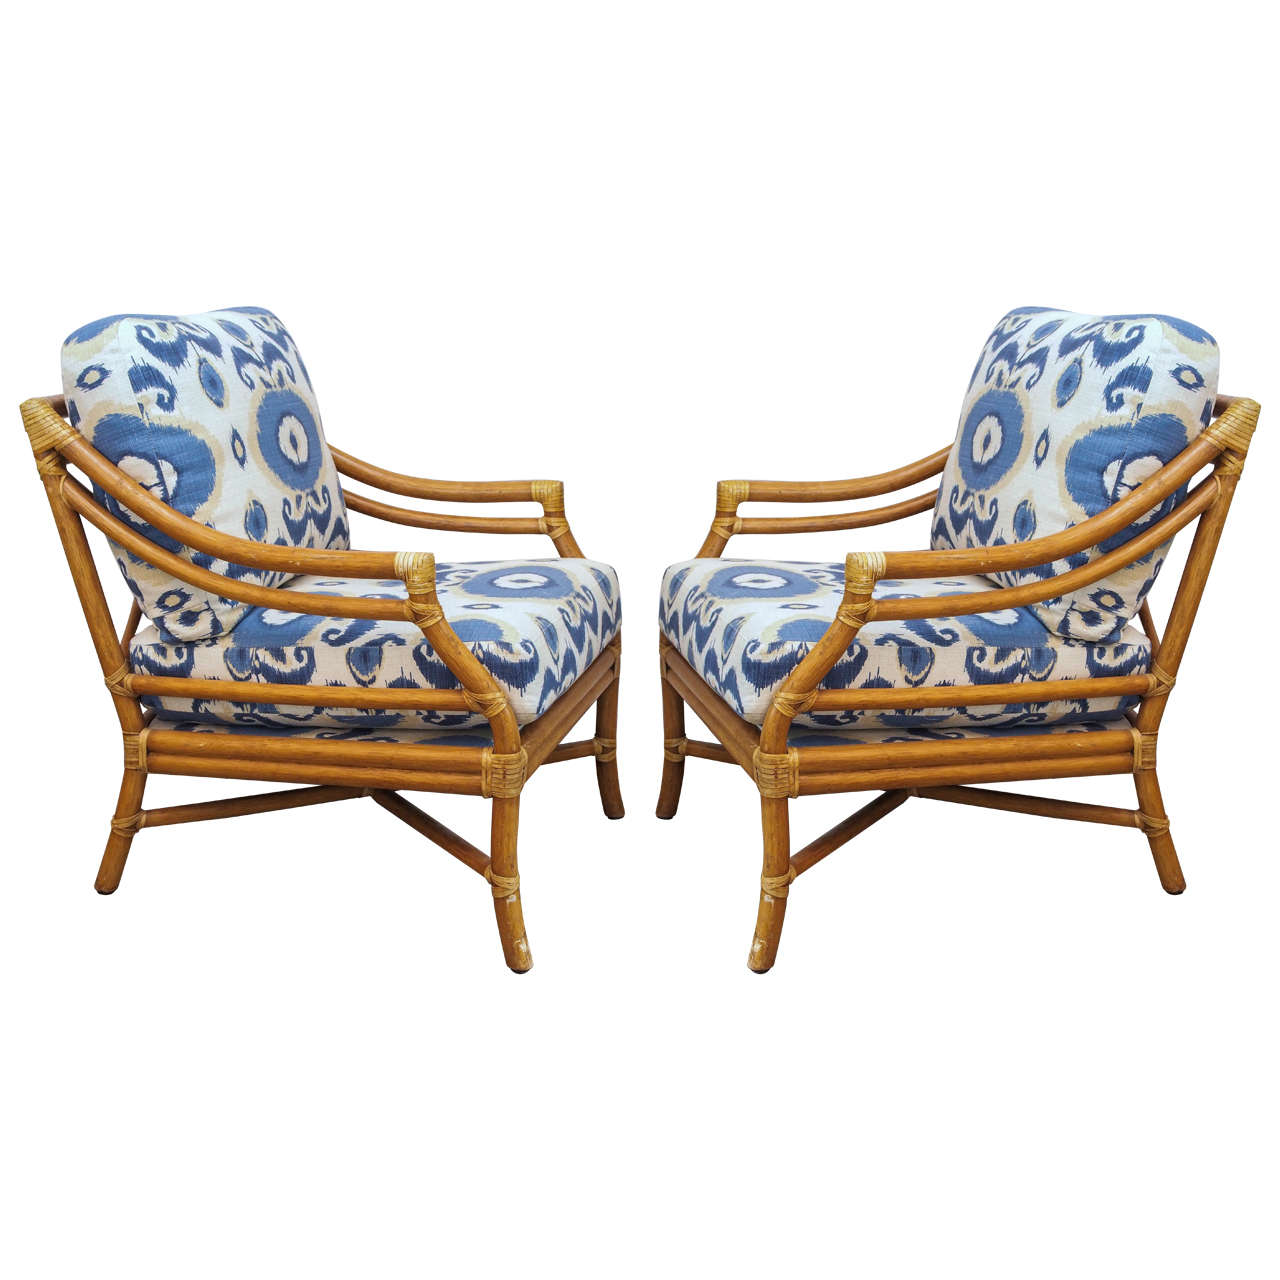 Pair of Vintage Bamboo Rattan Lounge Chairs